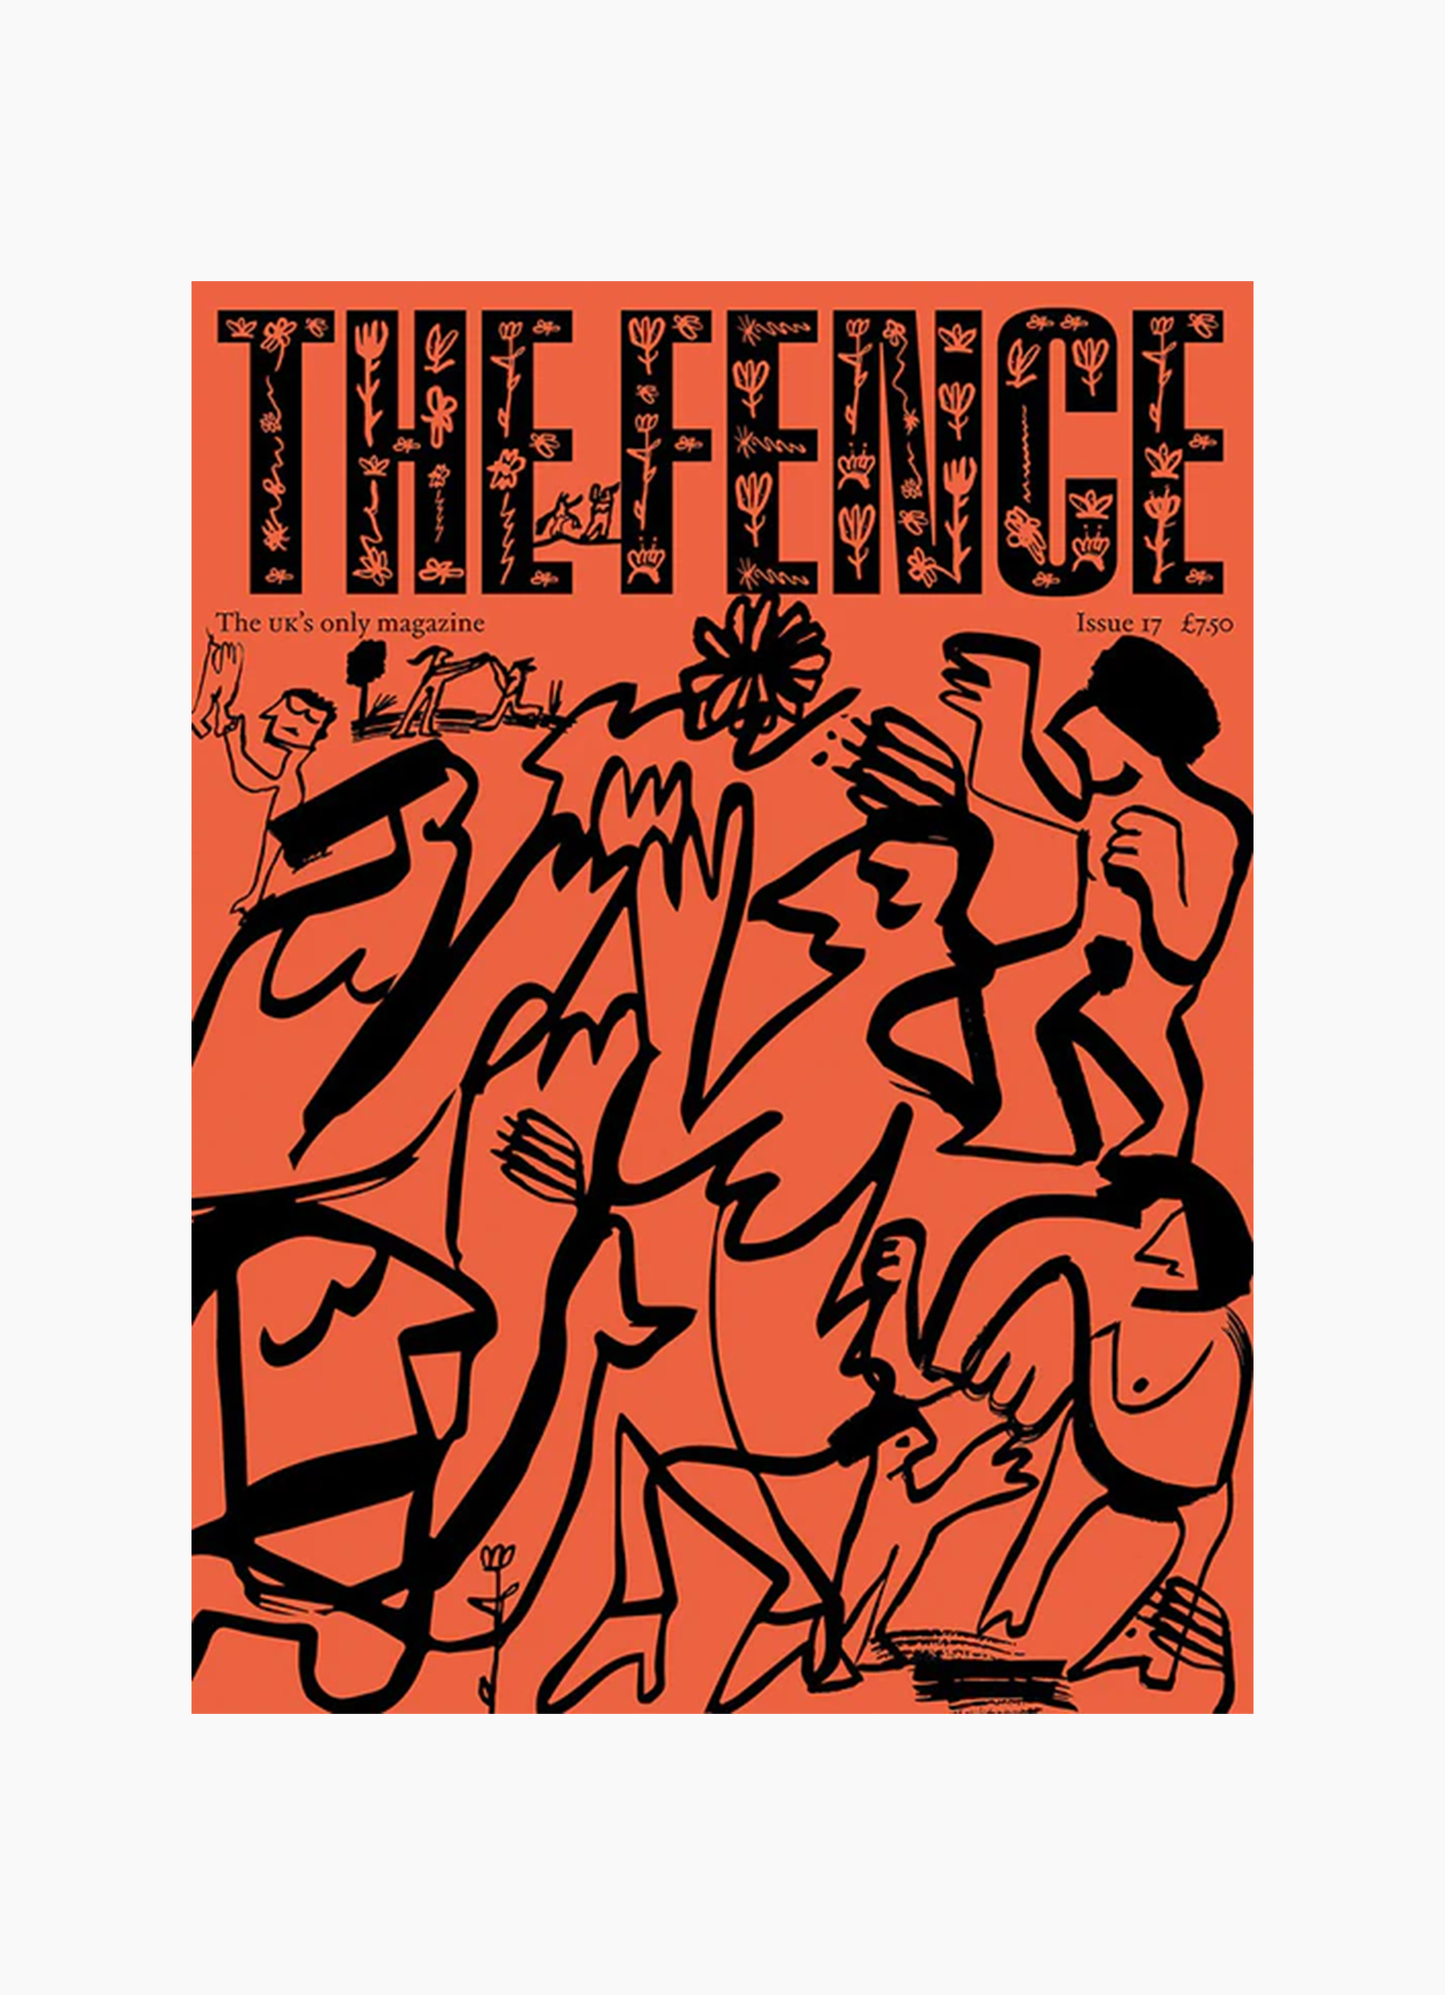 The Fence, Issue 17